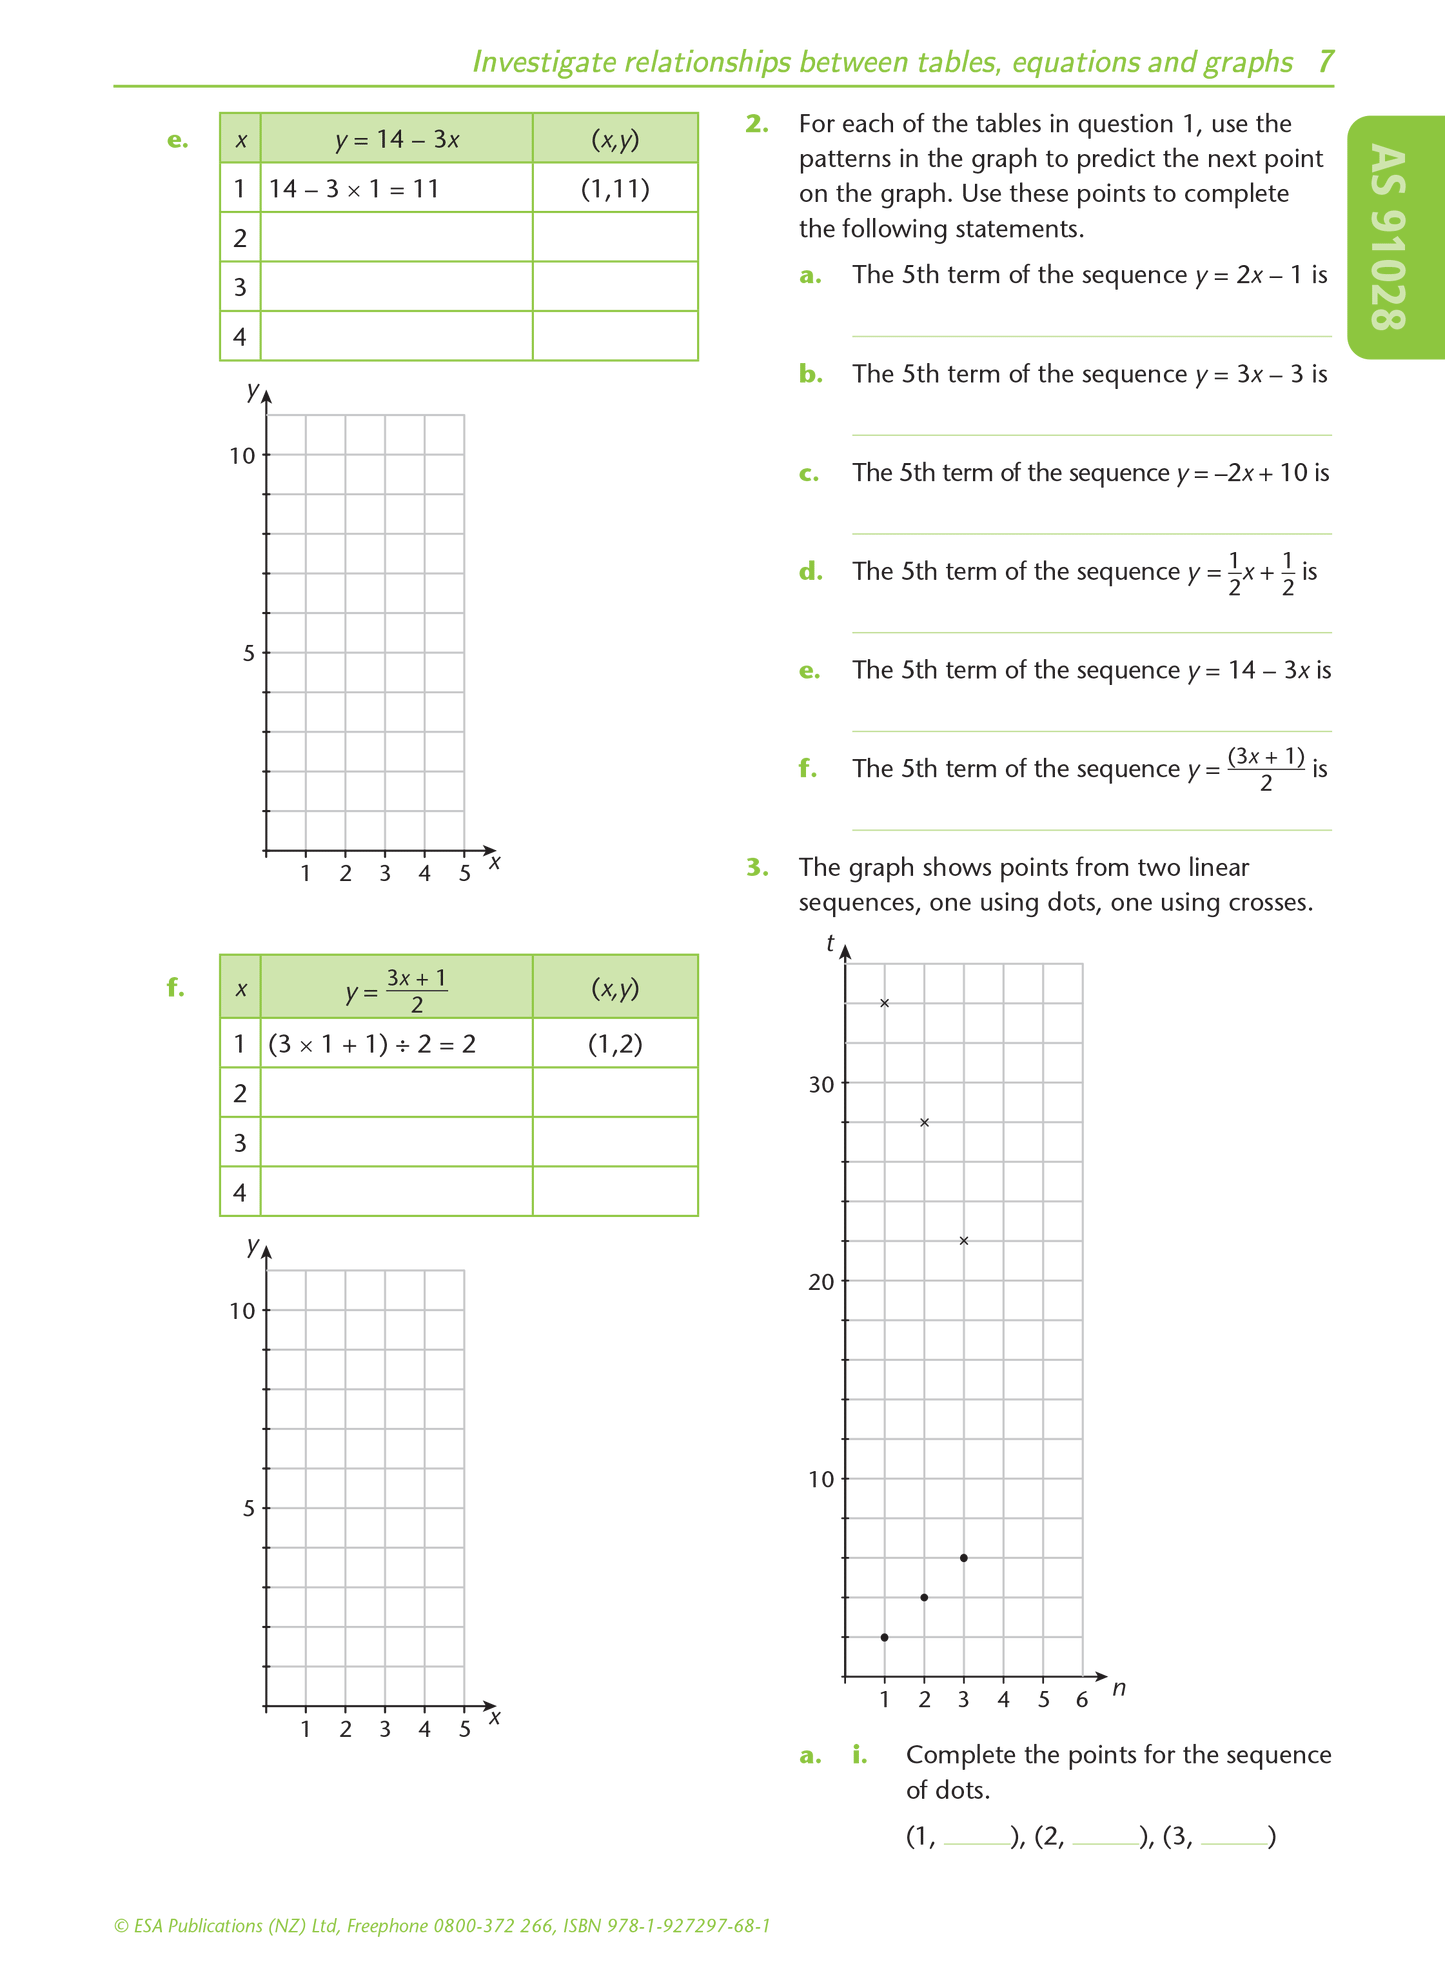 Level 1 Patterns and Graphs 1.3 Learning Workbook